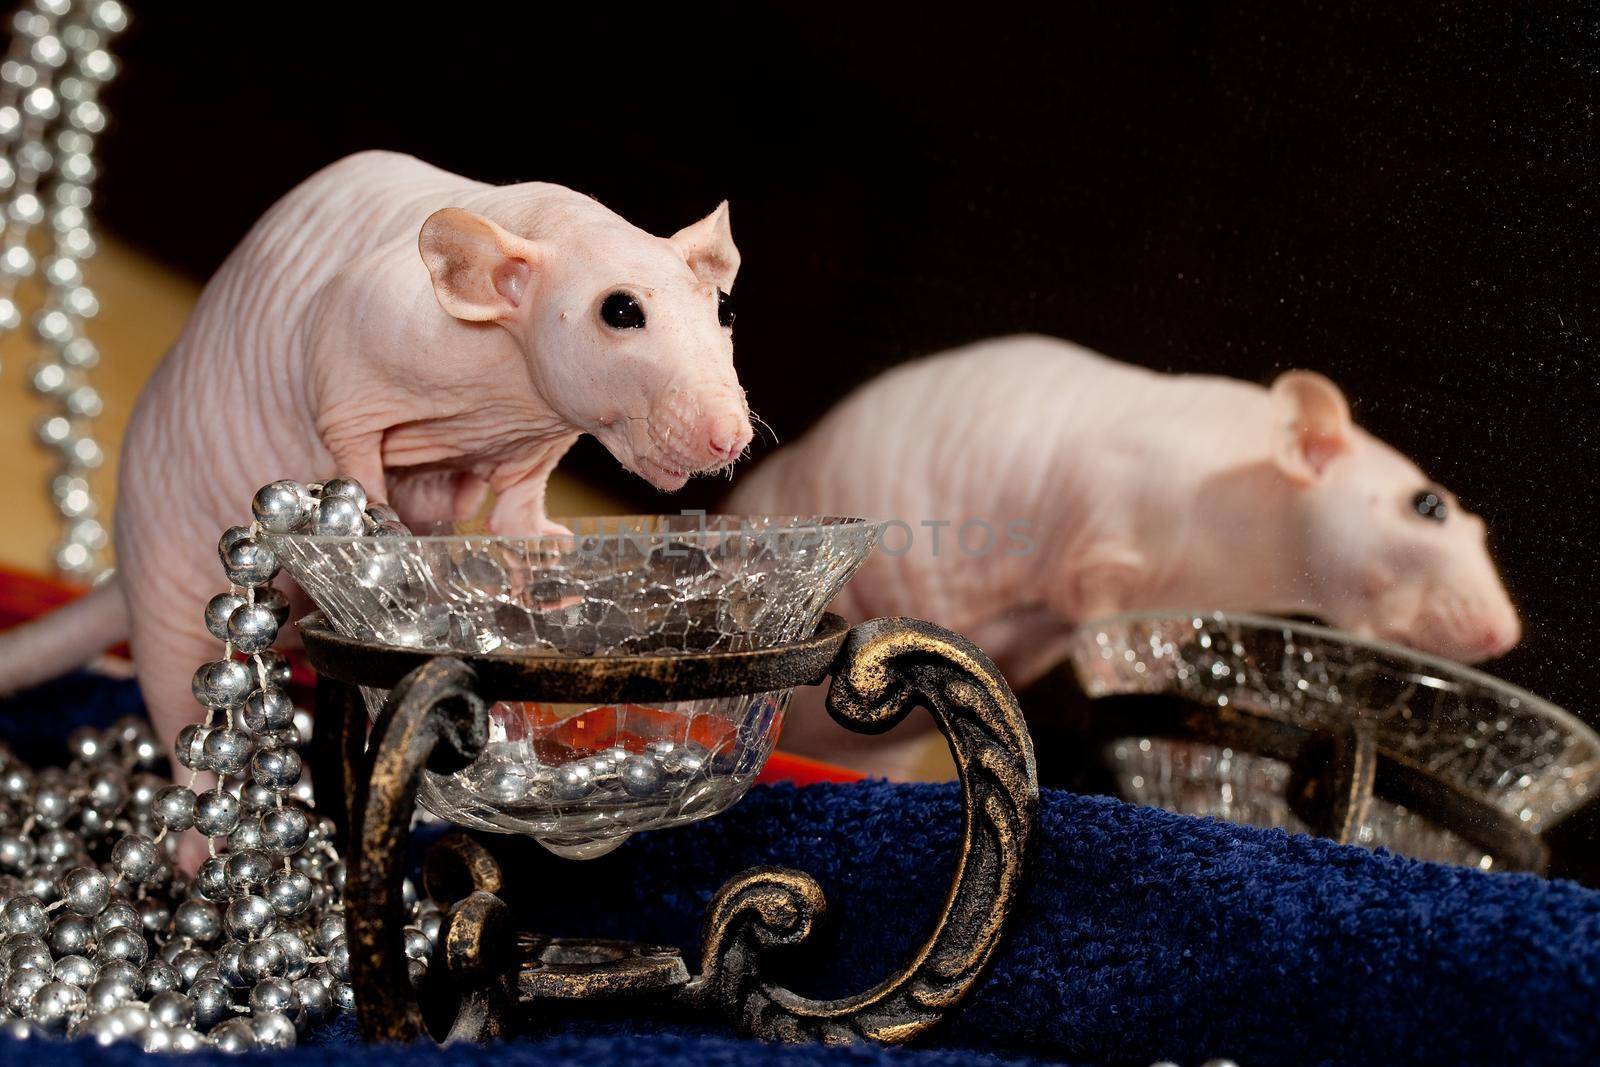 Sphinx rat, enjoyed a beautiful vase and necklace